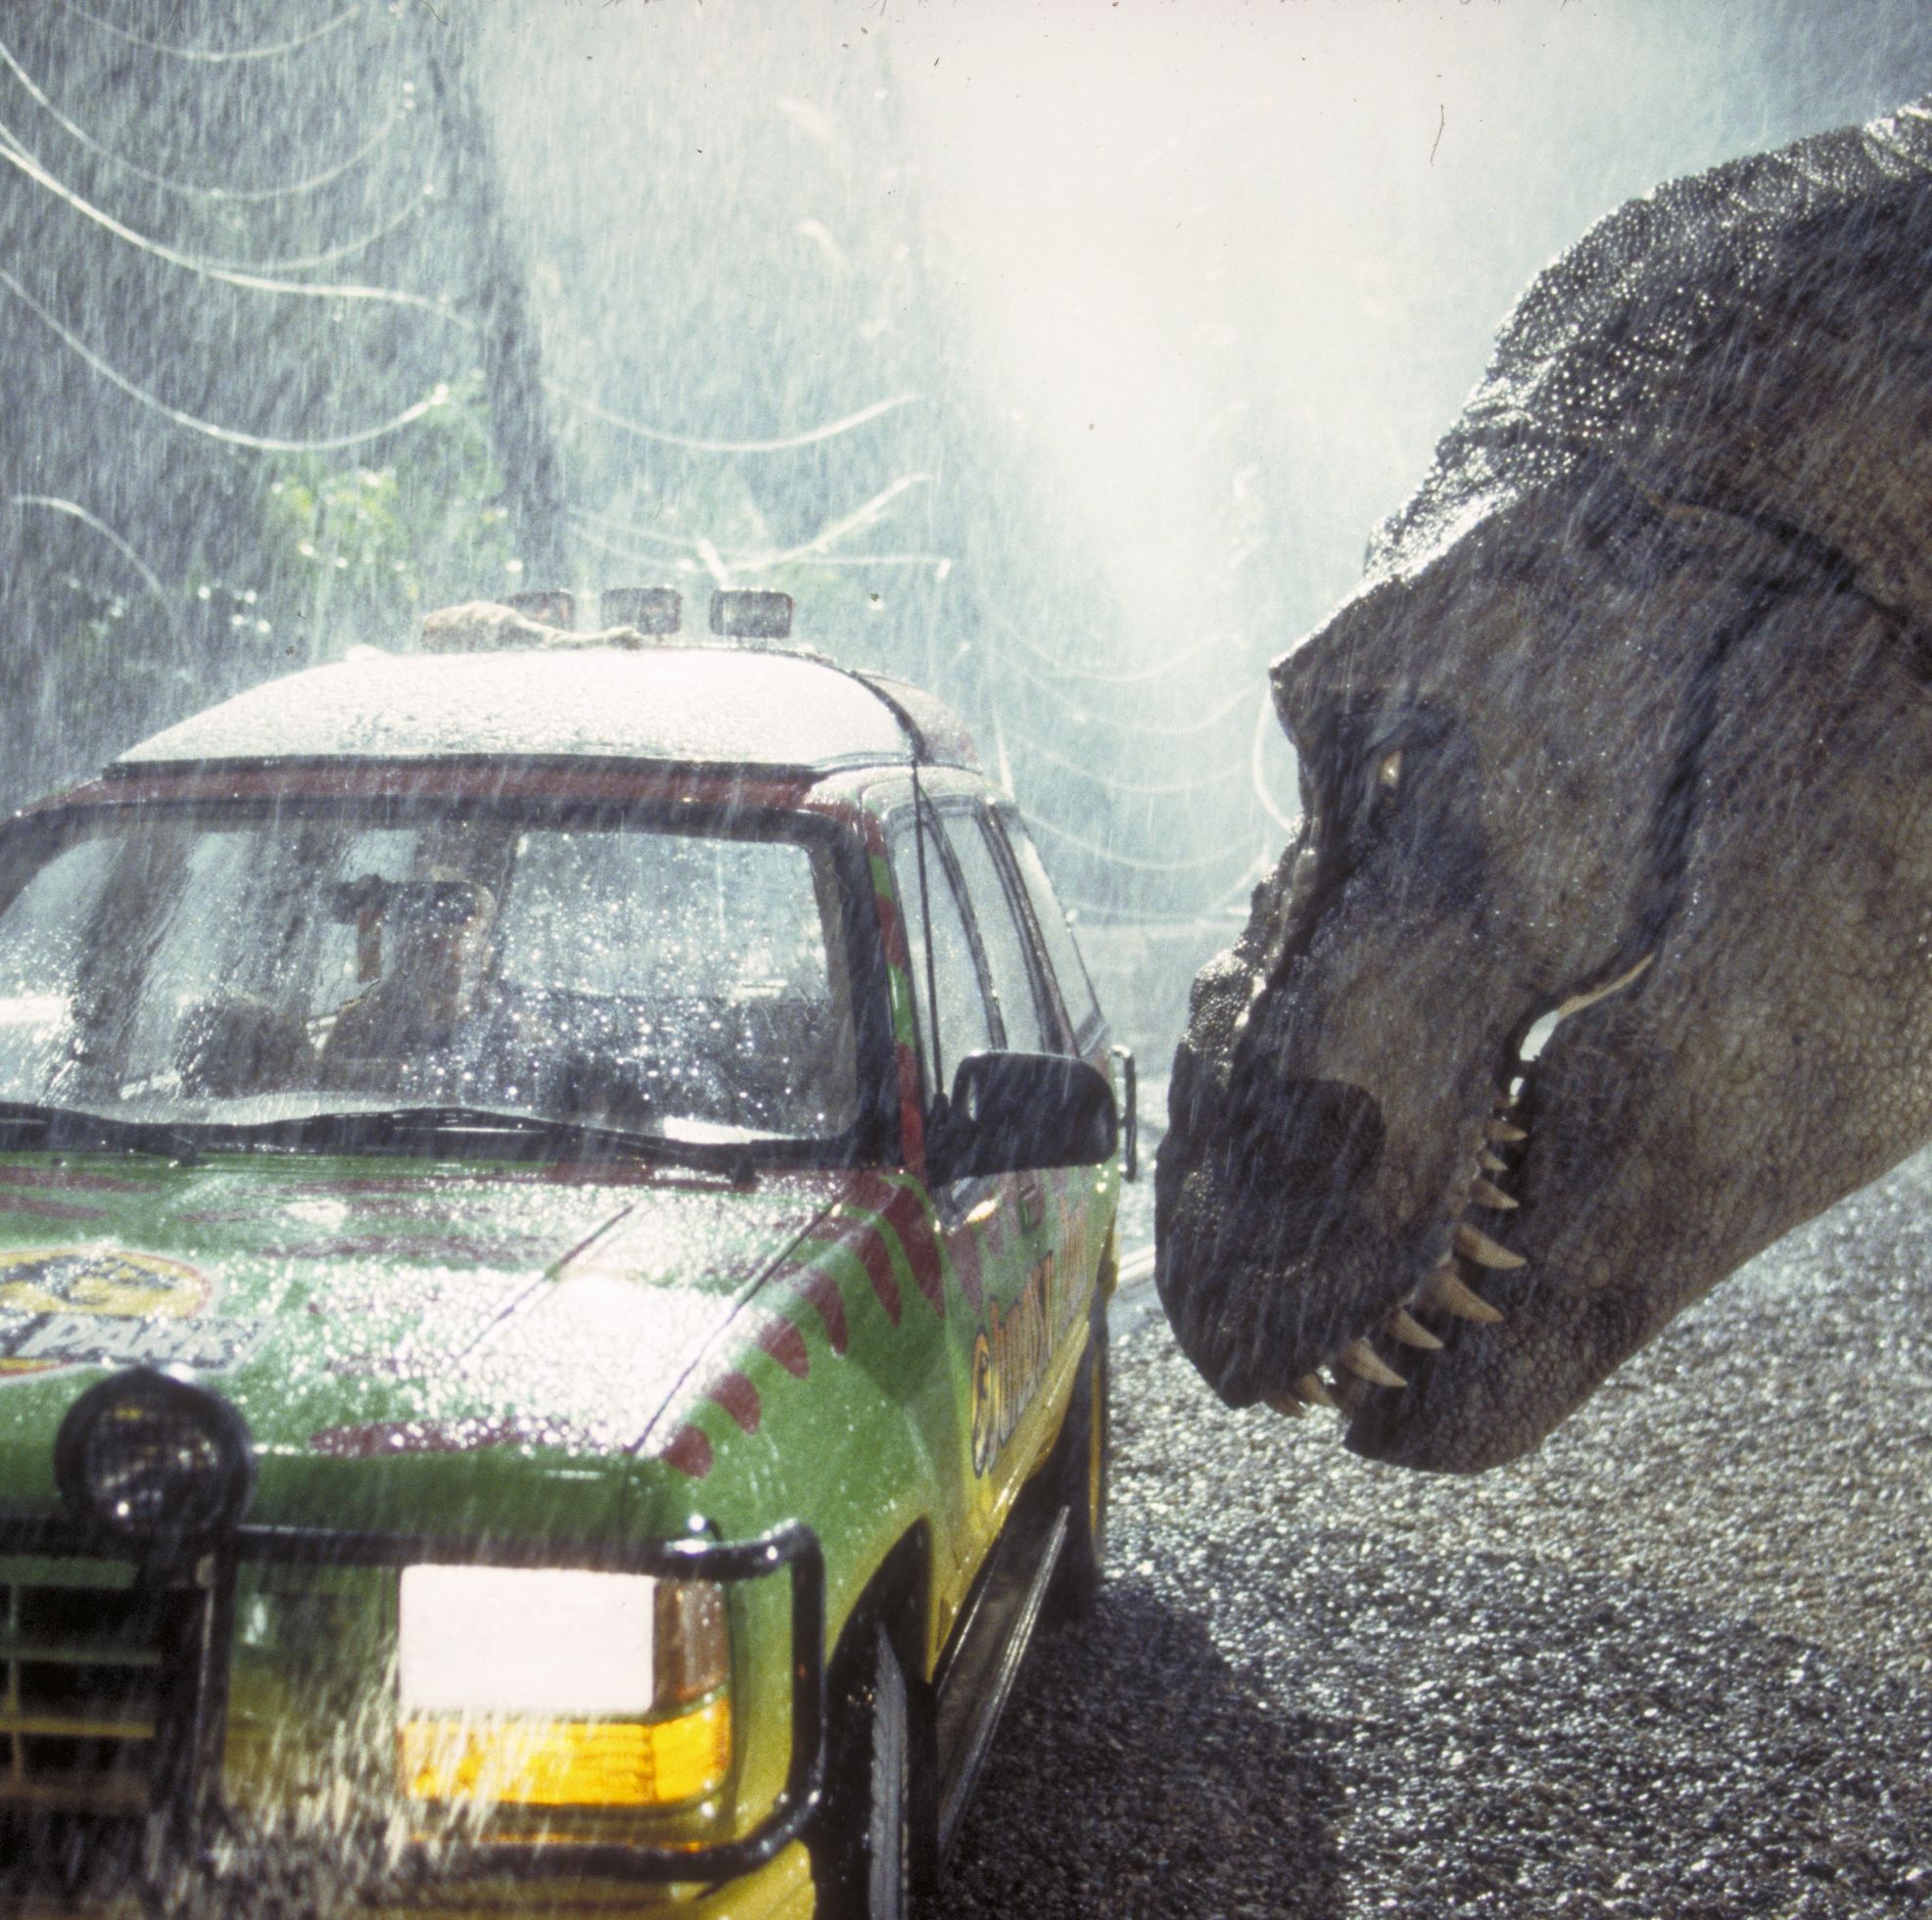 We Can Build a Real Jurassic Park, Says Neuralink Cofounder. Let's Not.